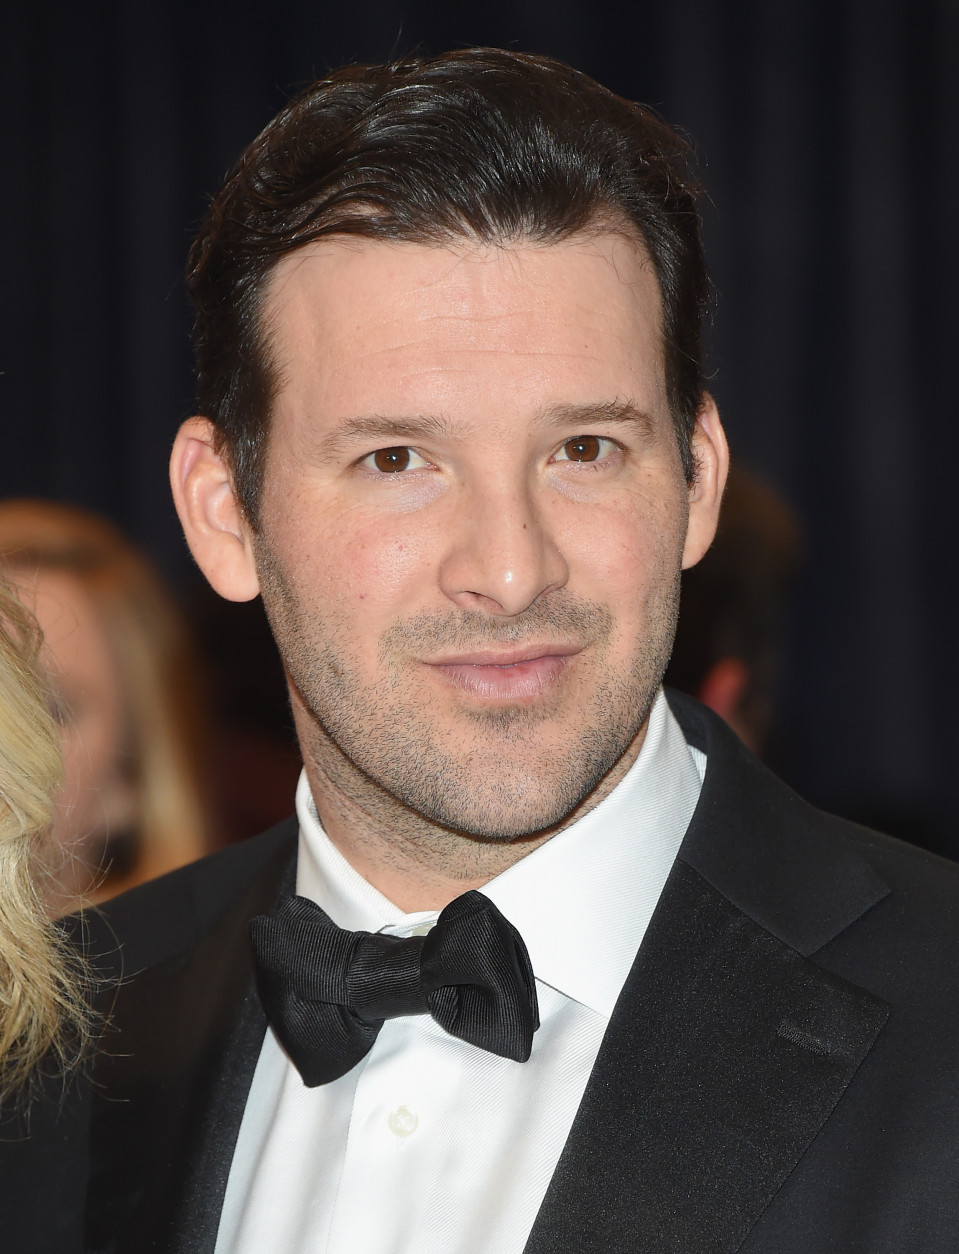 NFL player Tony Romo attends the 101st Annual White House Correspondents' Association Dinner at the Washington Hilton on April 25, 2015 in Washington, DC. (Photo by Michael Loccisano/Getty Images)